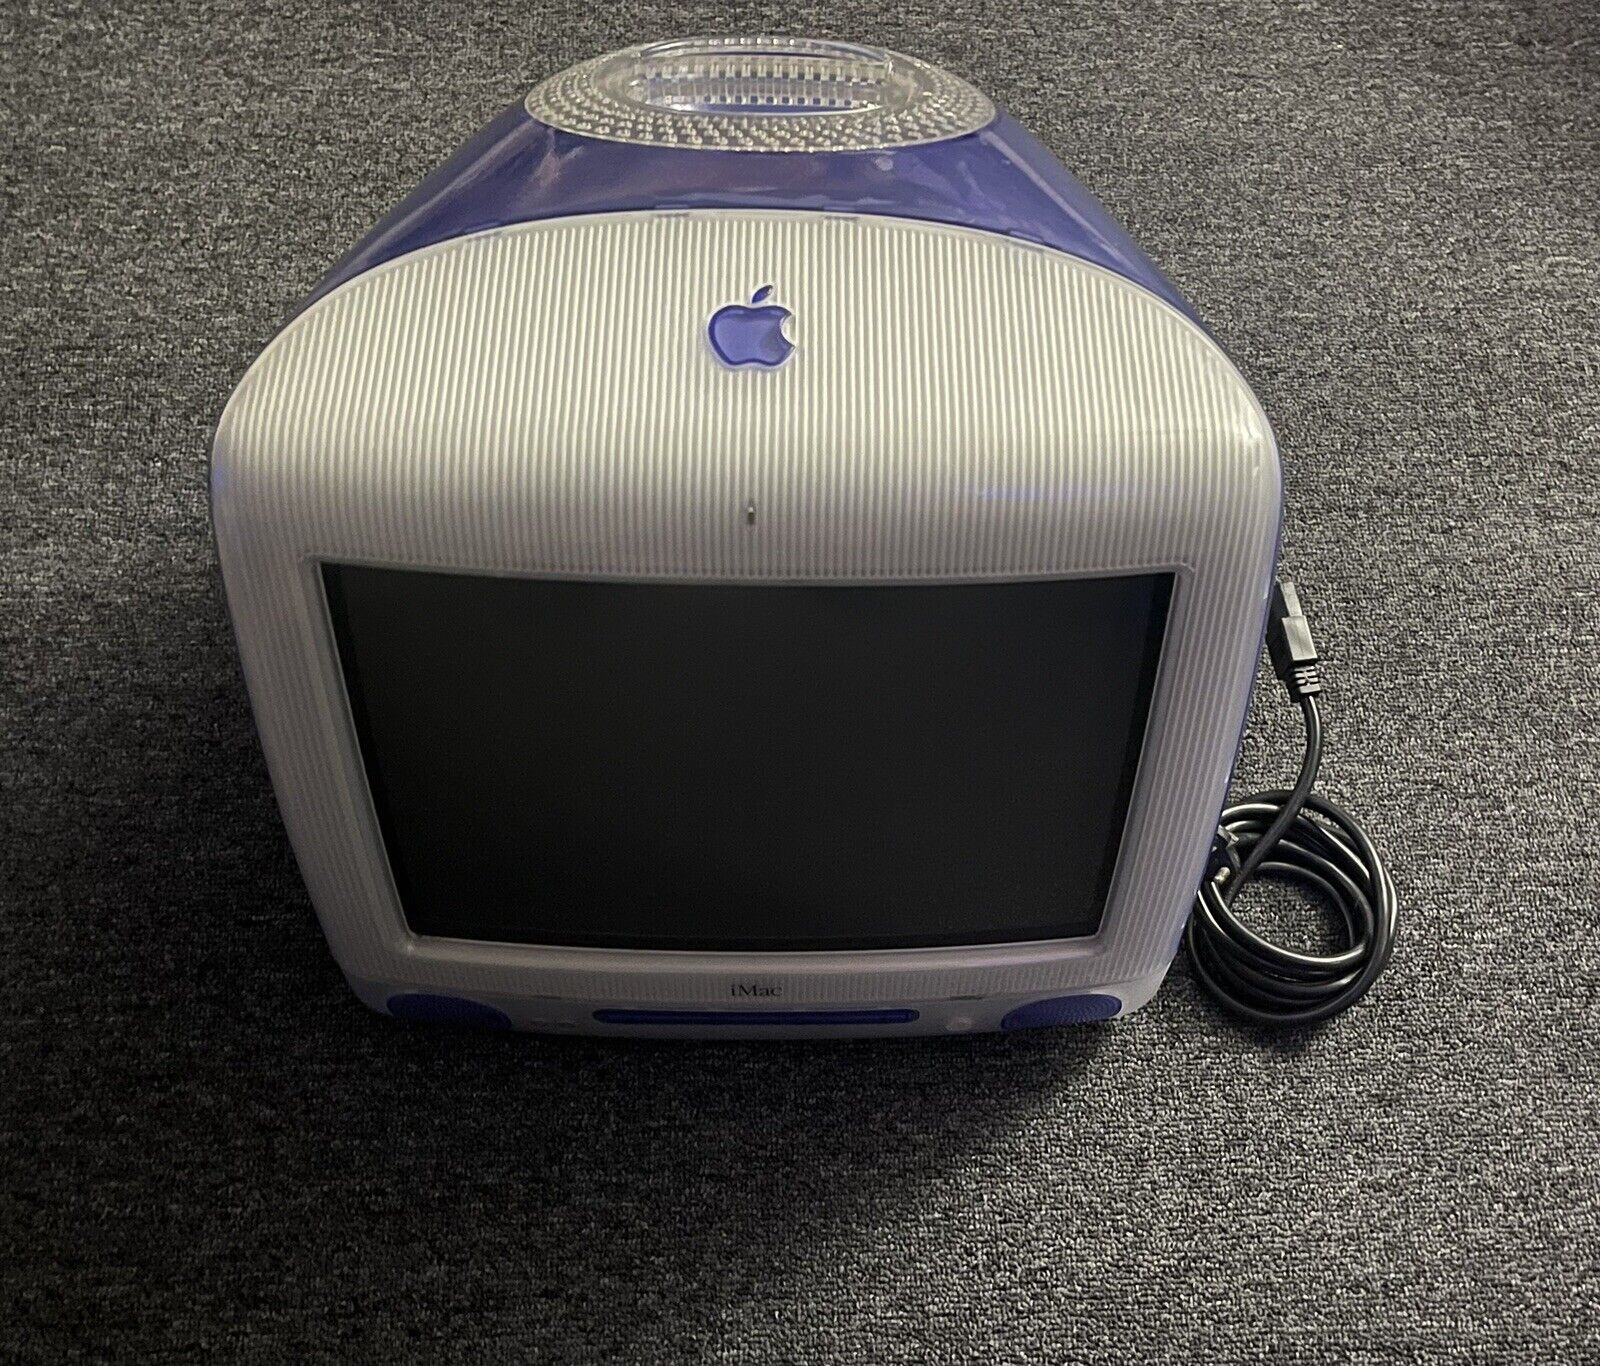 Apple iMac Blueberry G3 M5521 400MHz 64MB Ram 10GB HDD Works (Please Read)